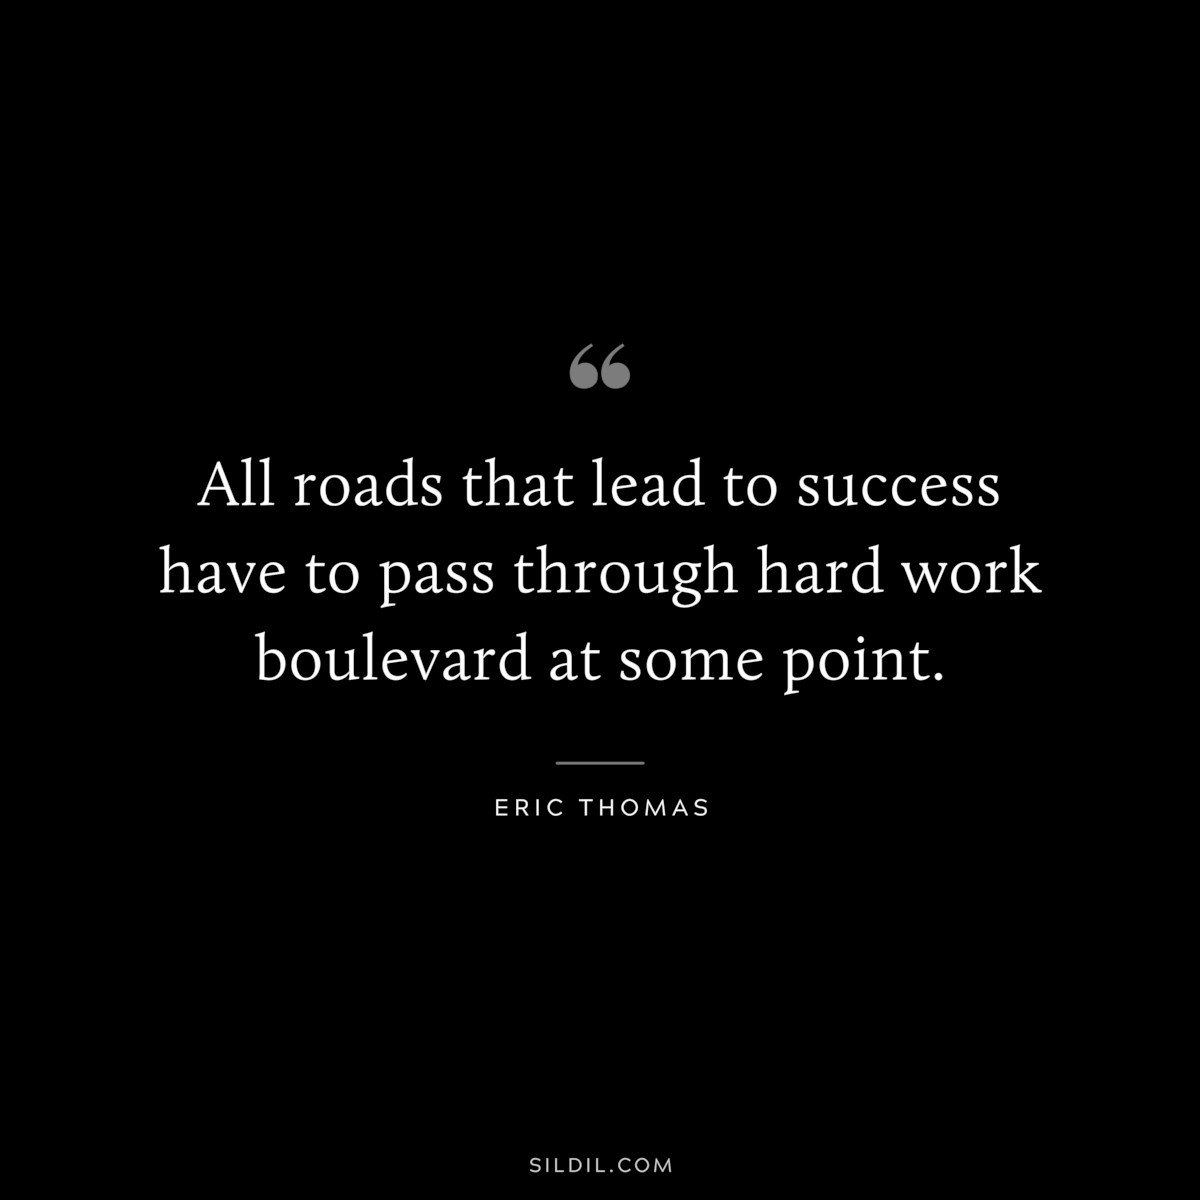 All roads that lead to success have to pass through hard work boulevard at some point. ― Eric Thomas